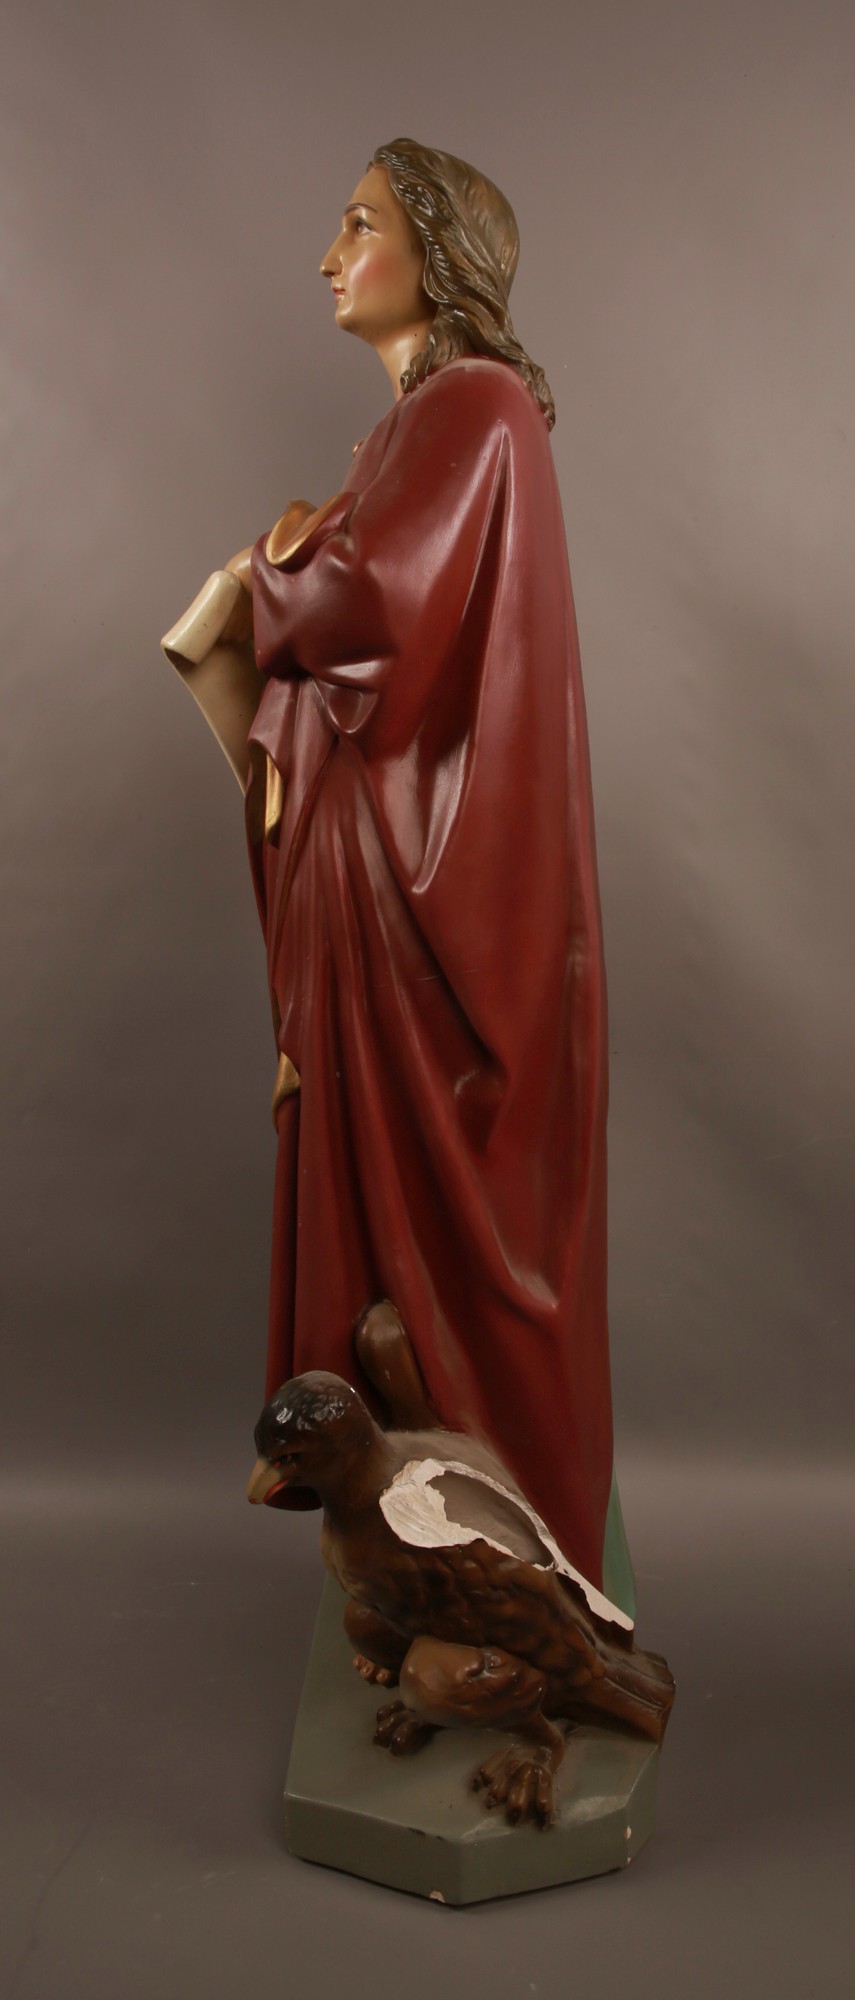 Large Religious Statue of Saint John Early 1900s 130cm Tall #86 - Image 2 of 7